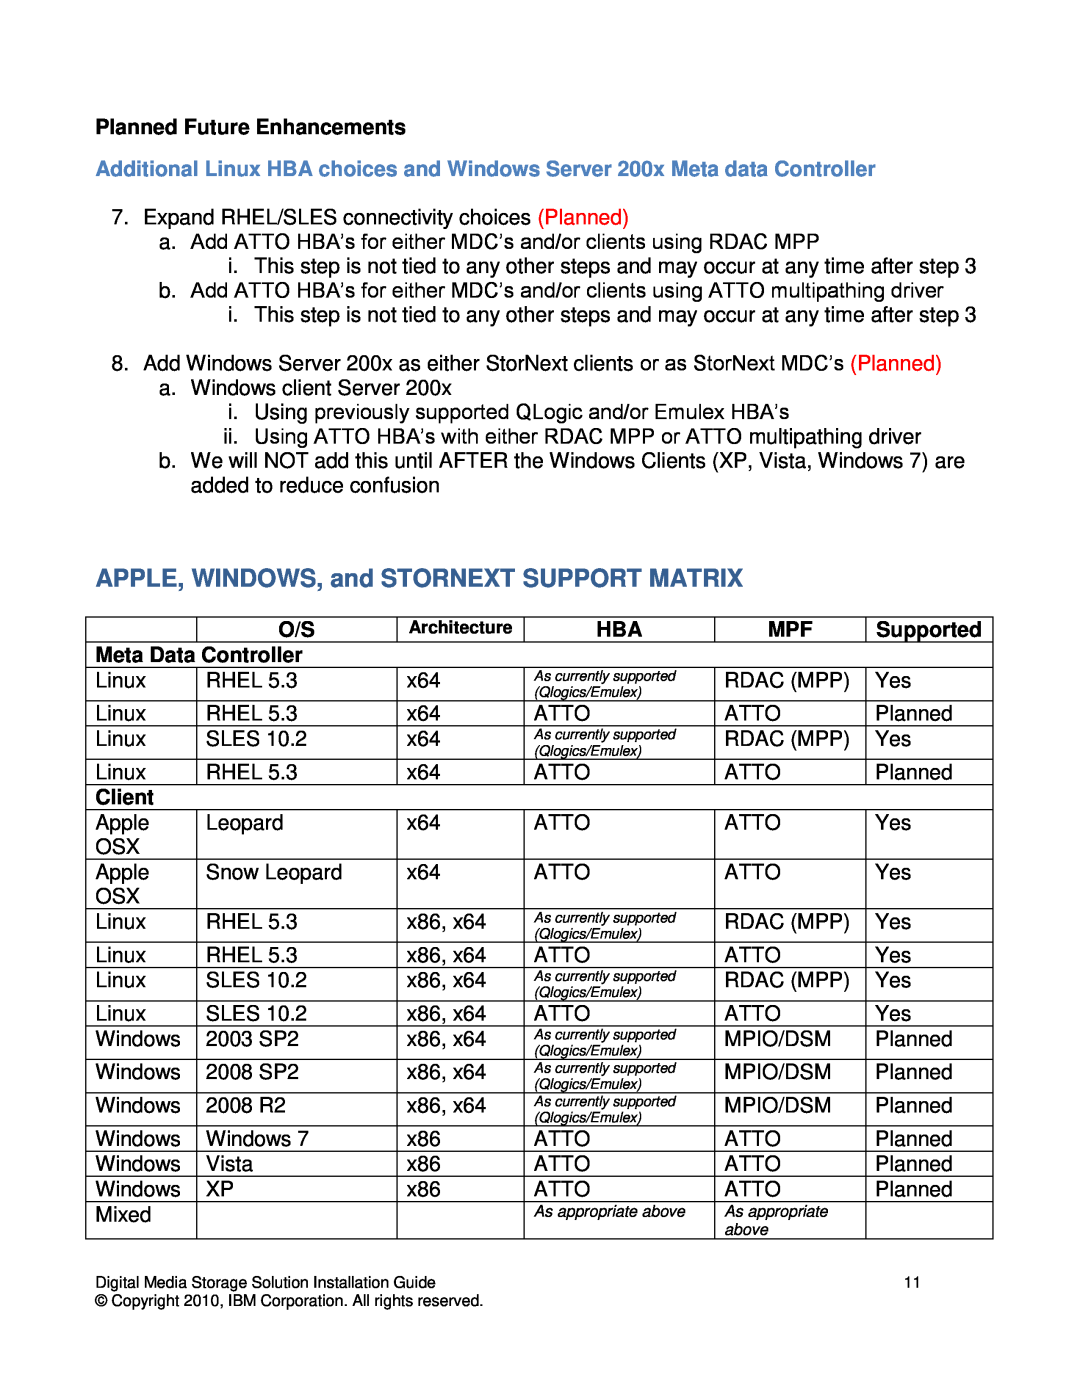 IBM DS4000 manual APPLE, WINDOWS, and STORNEXT SUPPORT MATRIX, Planned Future Enhancements, Supported, Meta Data Controller 